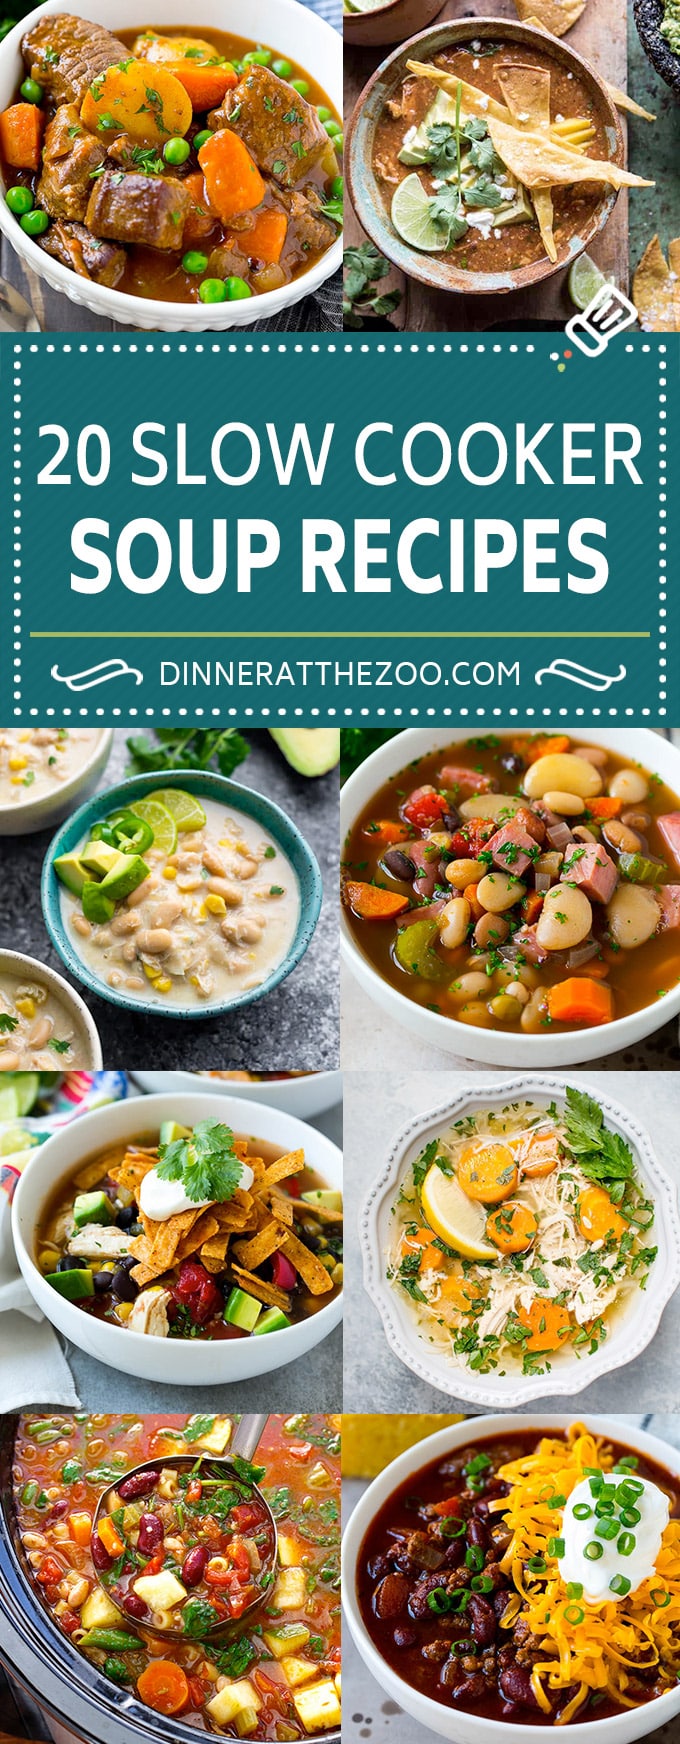 20 Slow Cooker Soup Recipes - Dinner at the Zoo